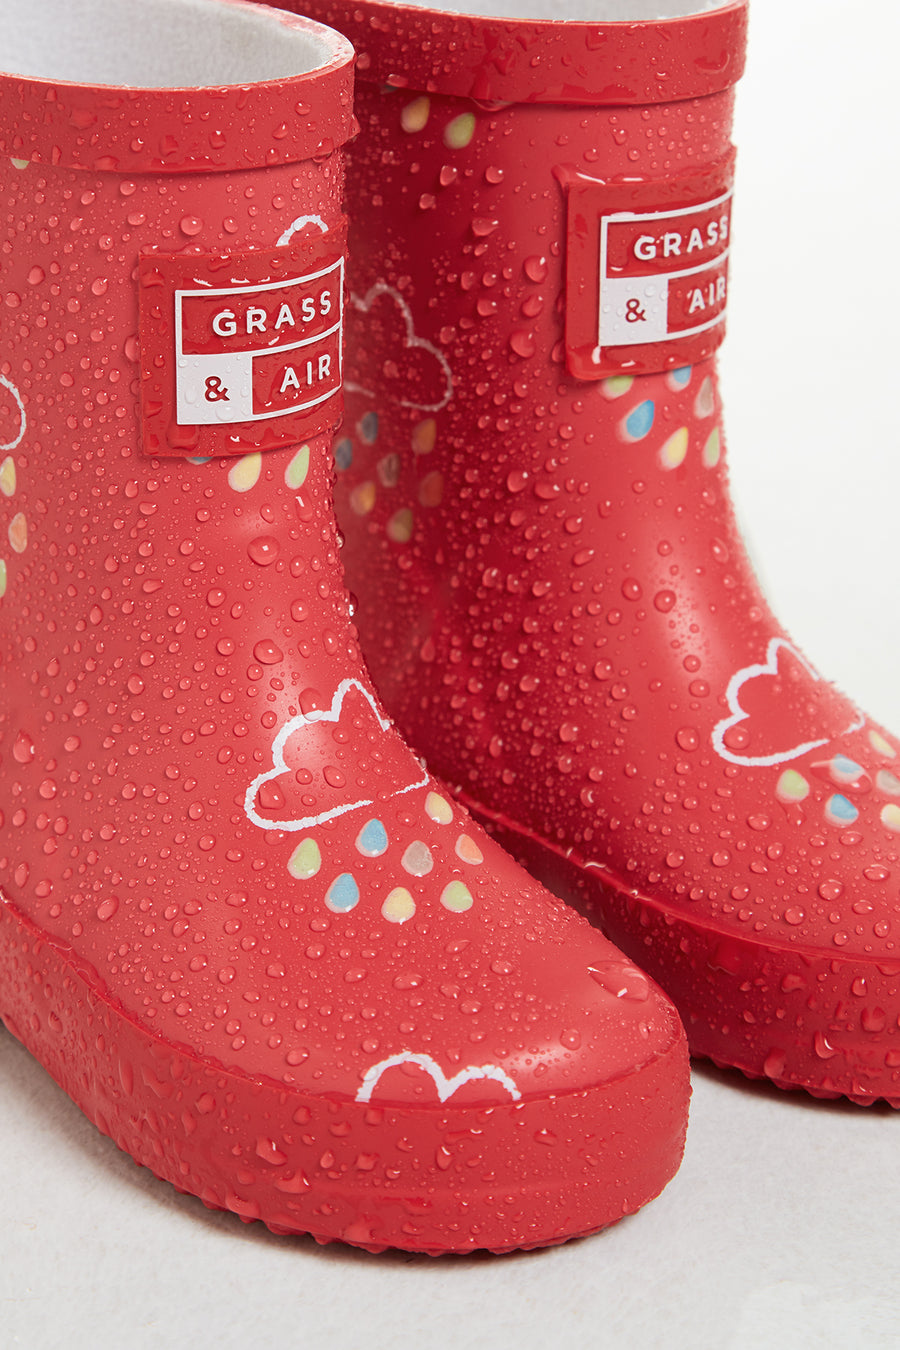 Grass and Air wellies|Infant |Colour Changing|Dark Corall